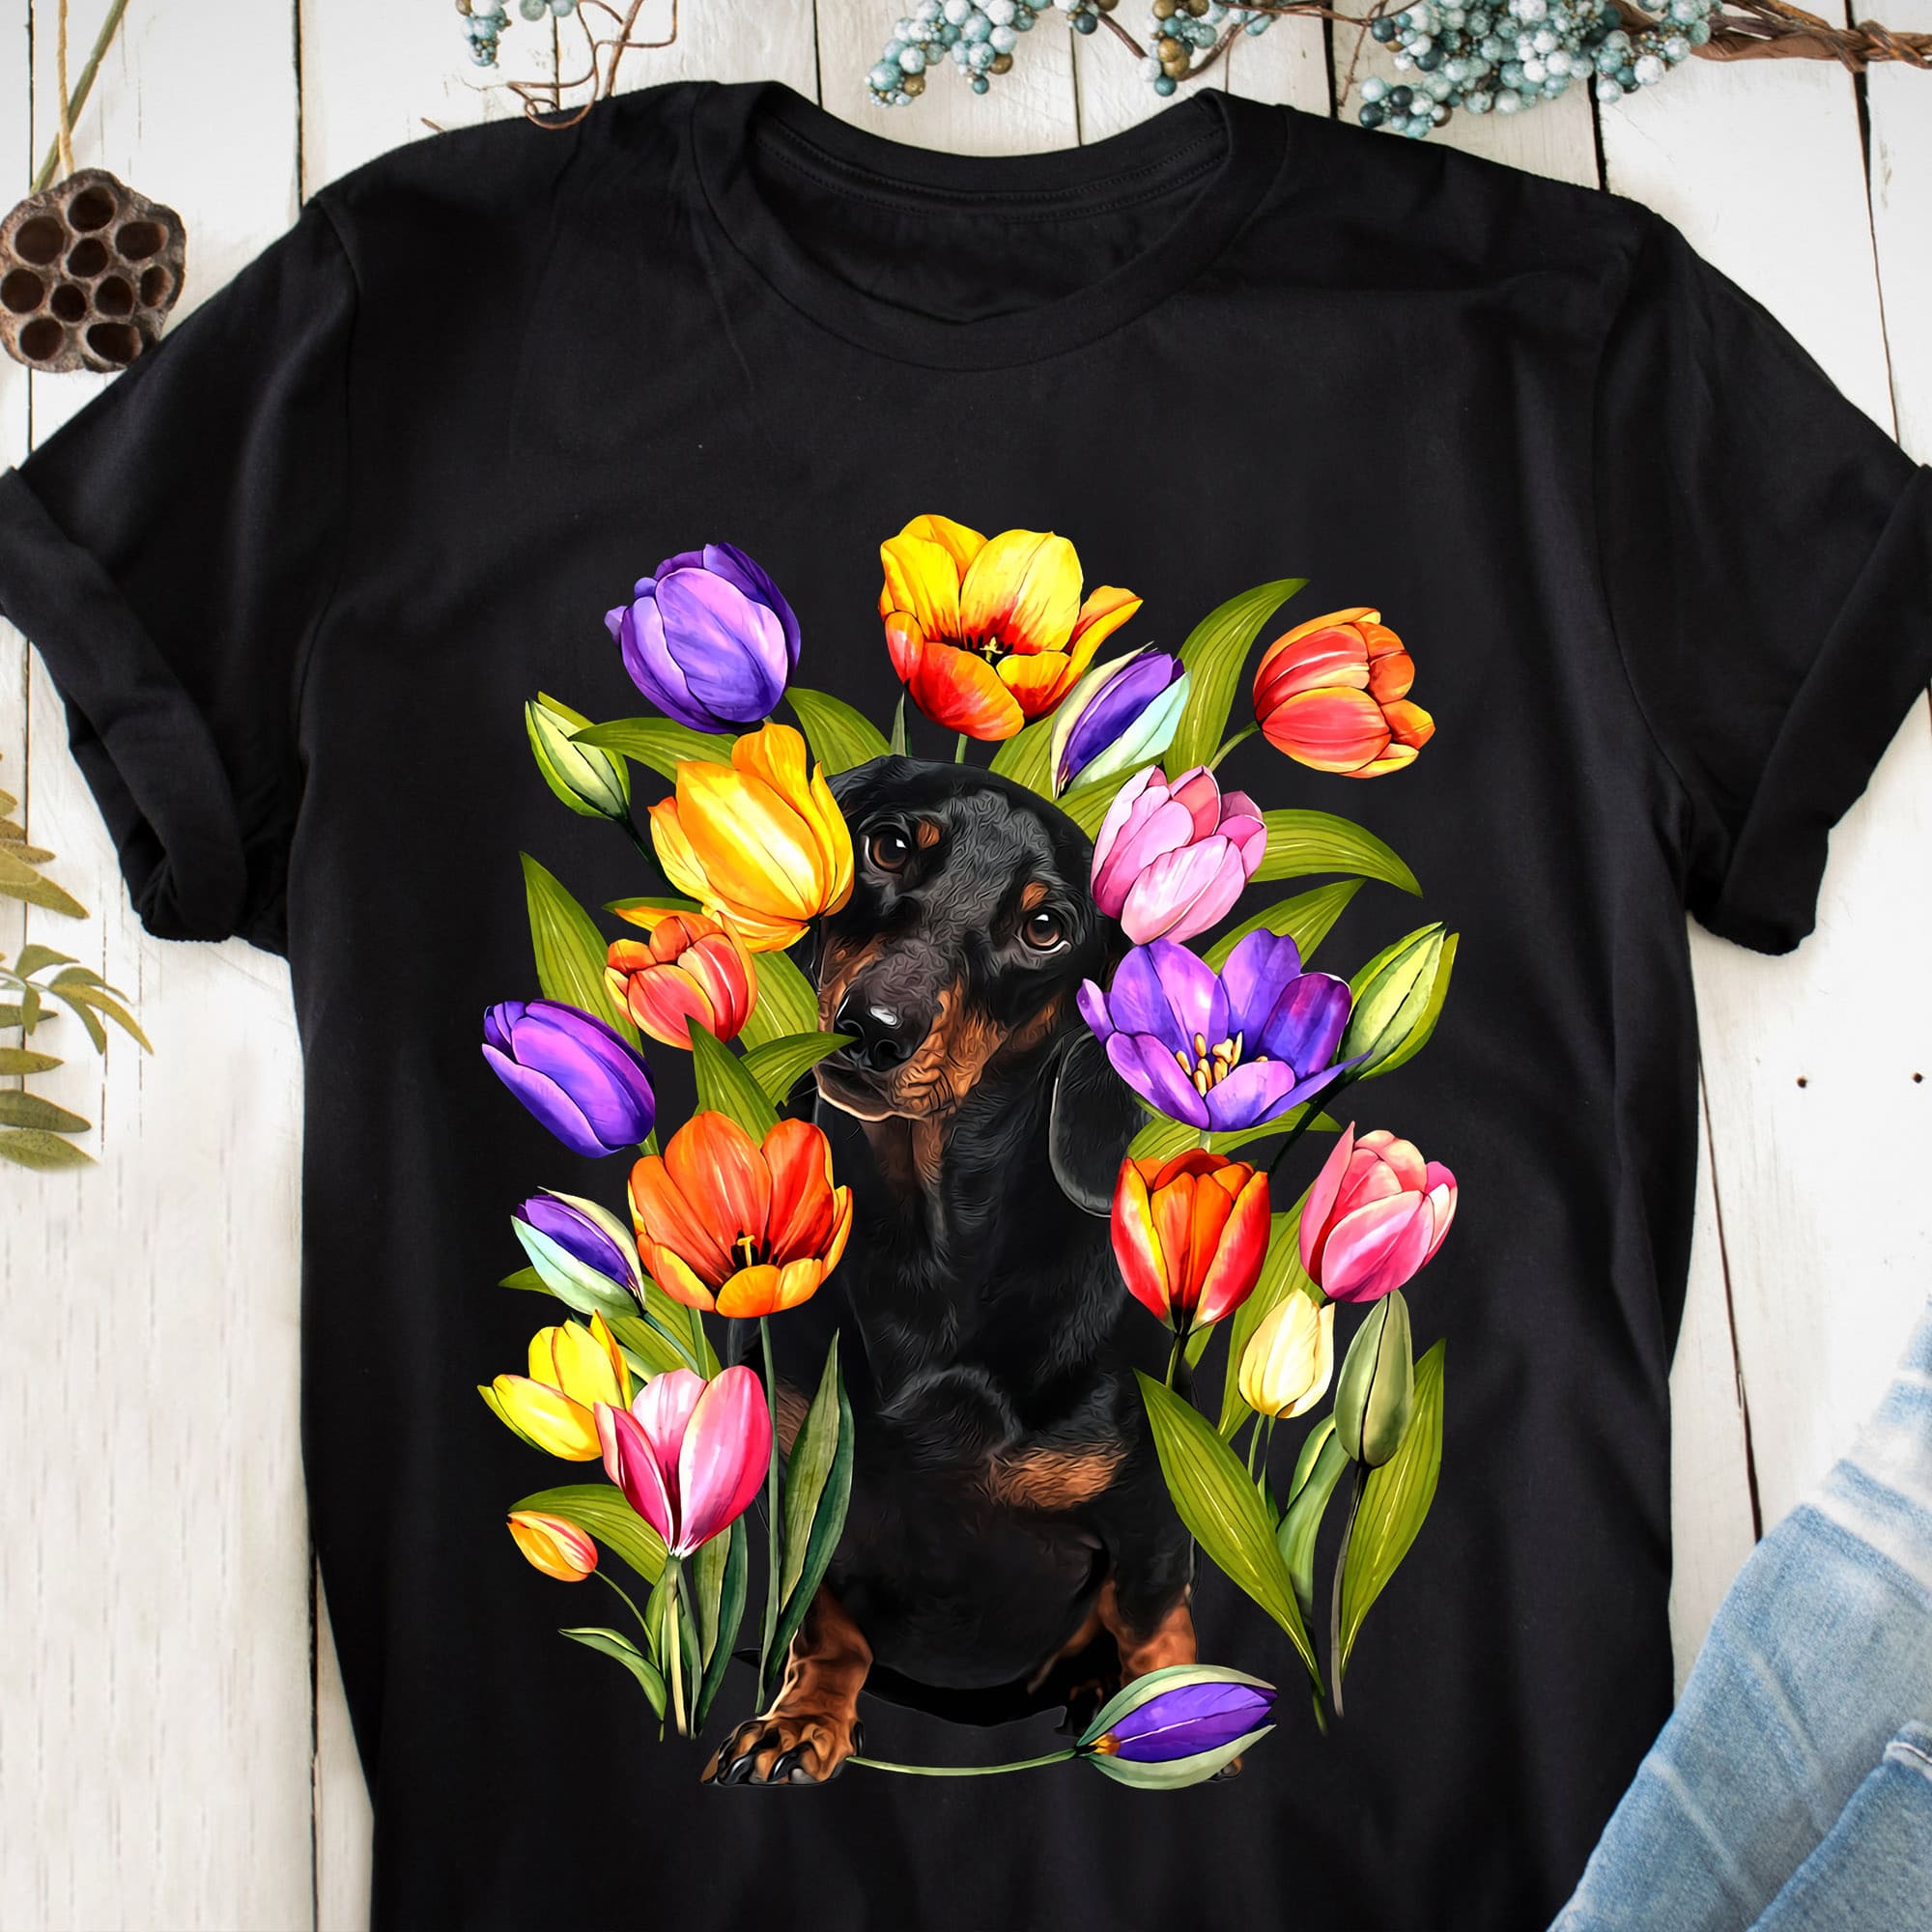 Dachshund and tulip - Gift for dog lover, Dachshund dog graphic T-shirt